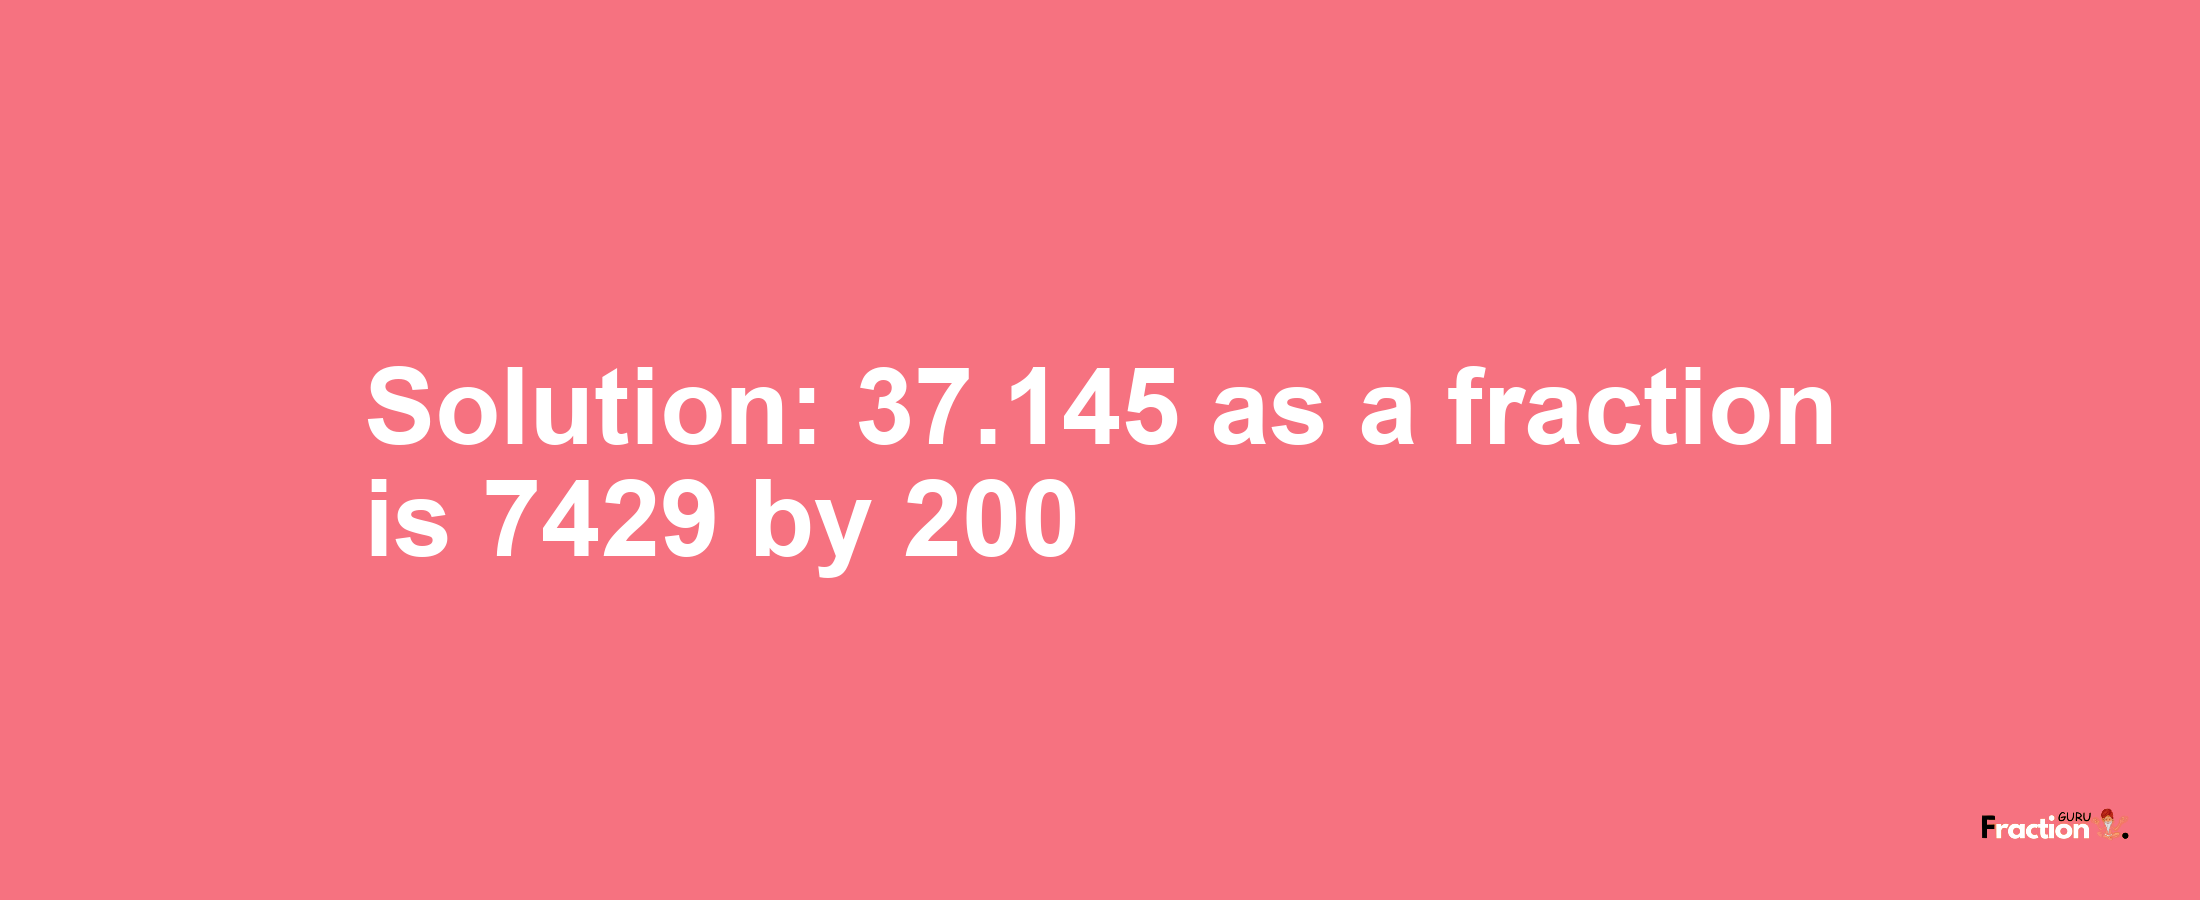 Solution:37.145 as a fraction is 7429/200